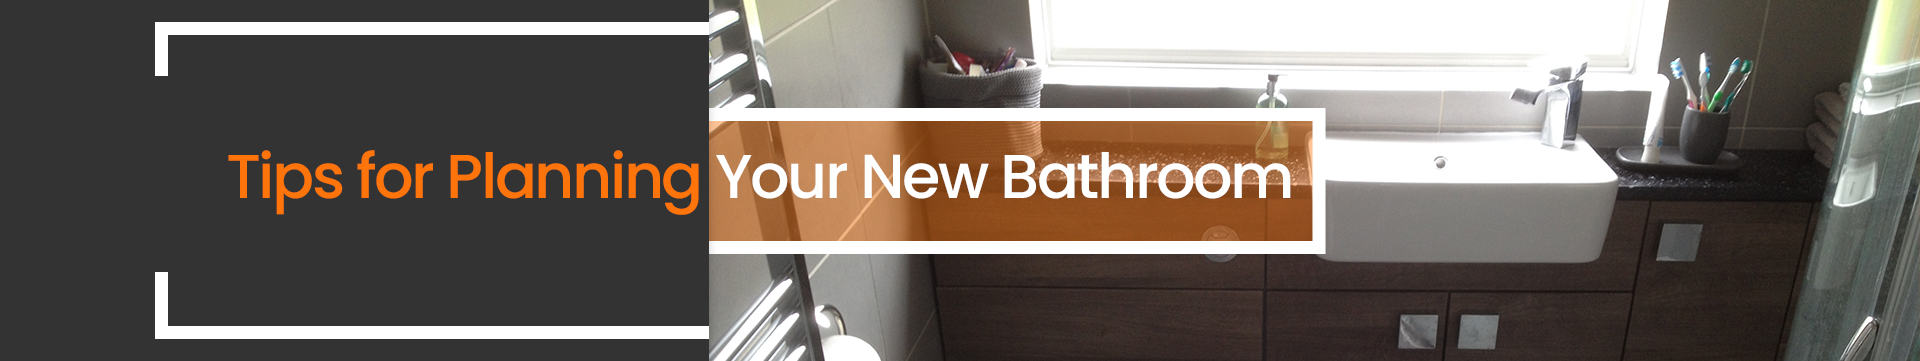 Tips for Planning Your New Bathroom banner Facelift